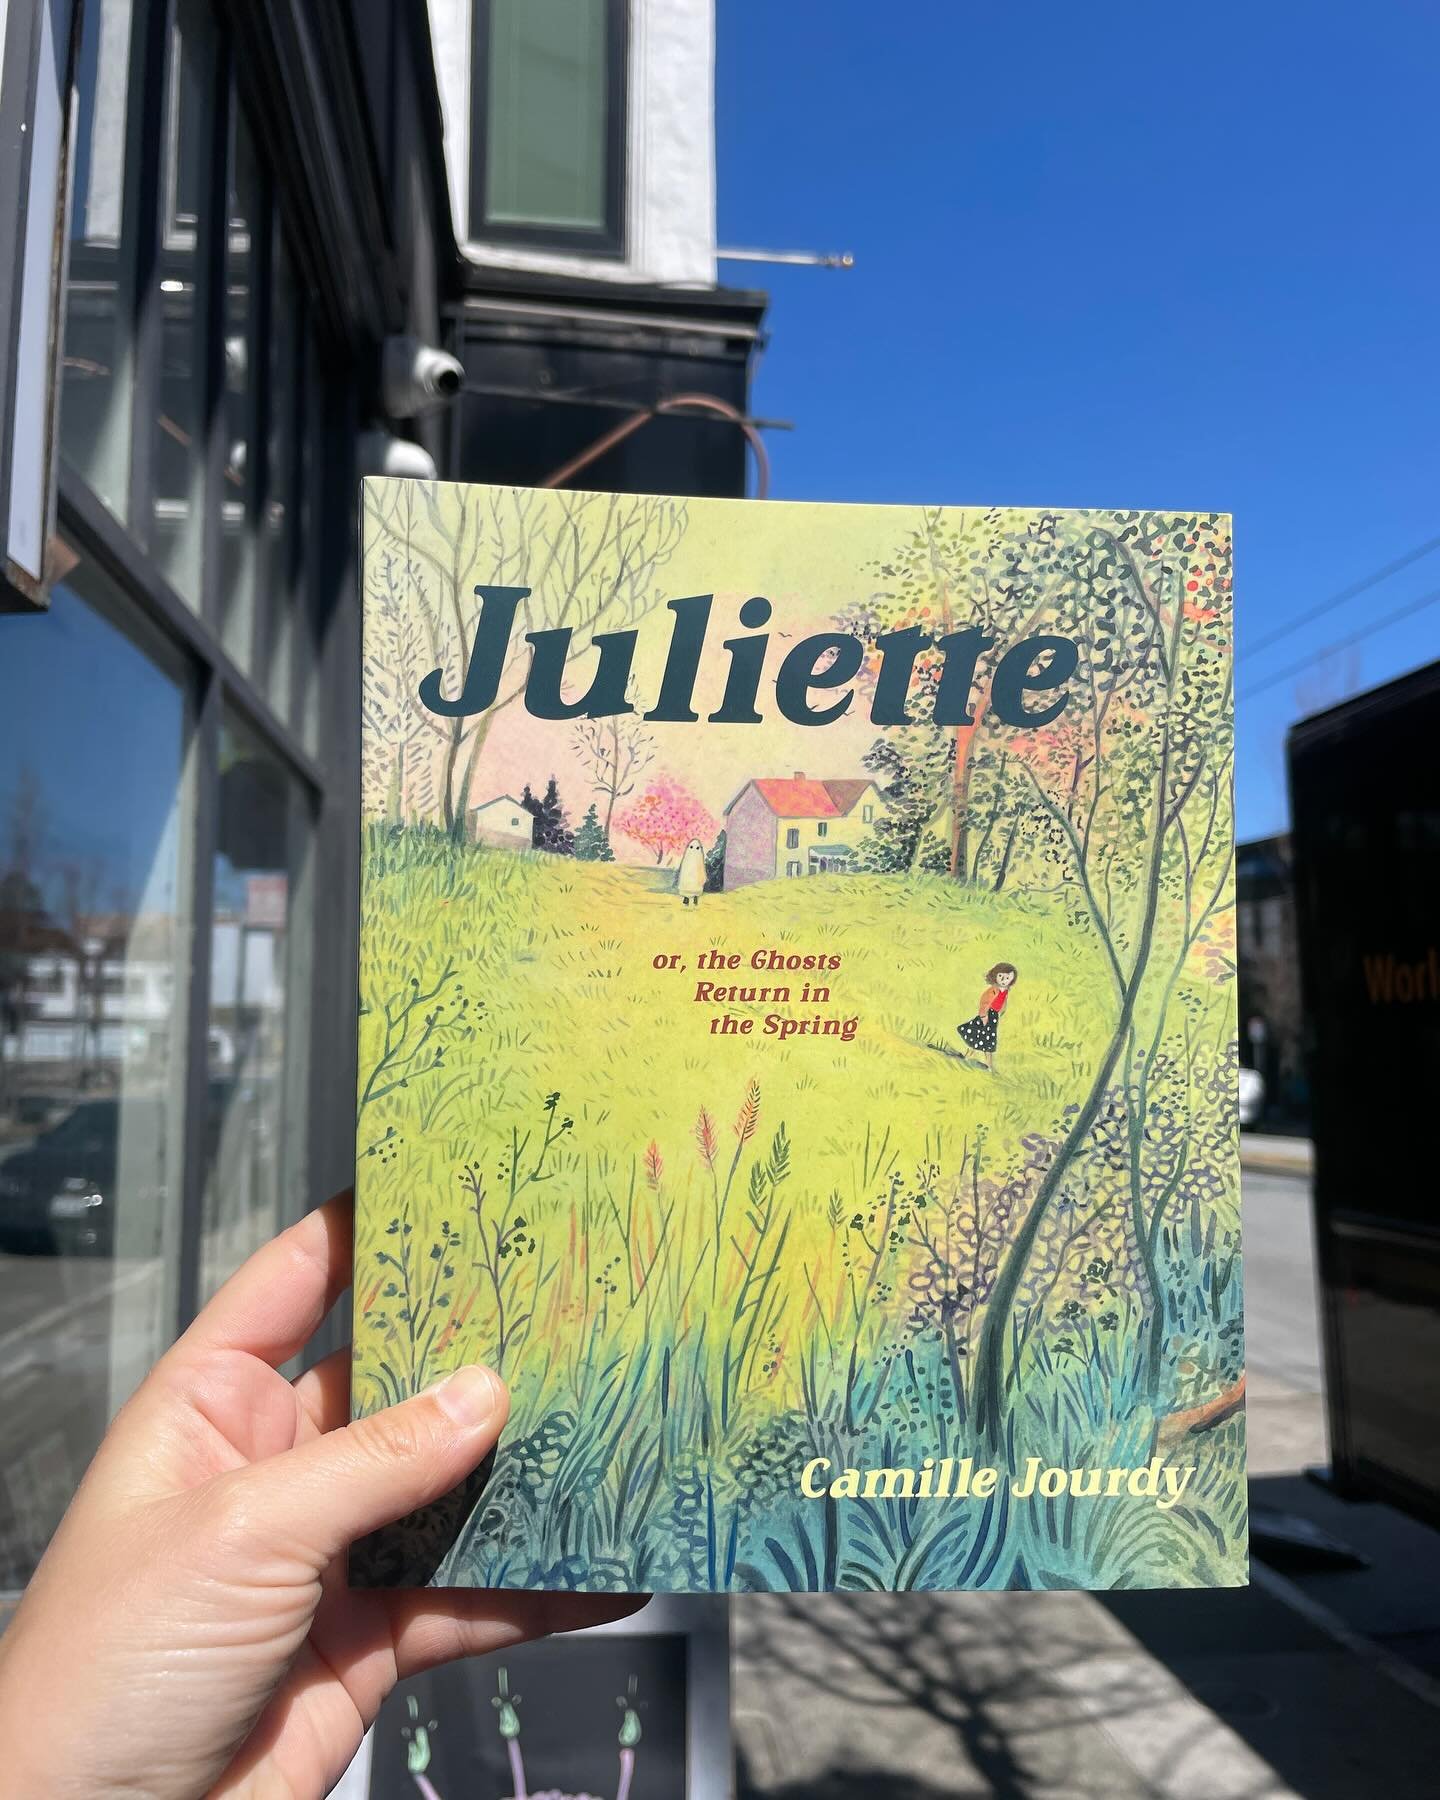 a beautiful spring day to read a beautiful spring book🌼

If you like painterly art style, creative panel structure, or ruminating on complex family dynamics - check out Juliette